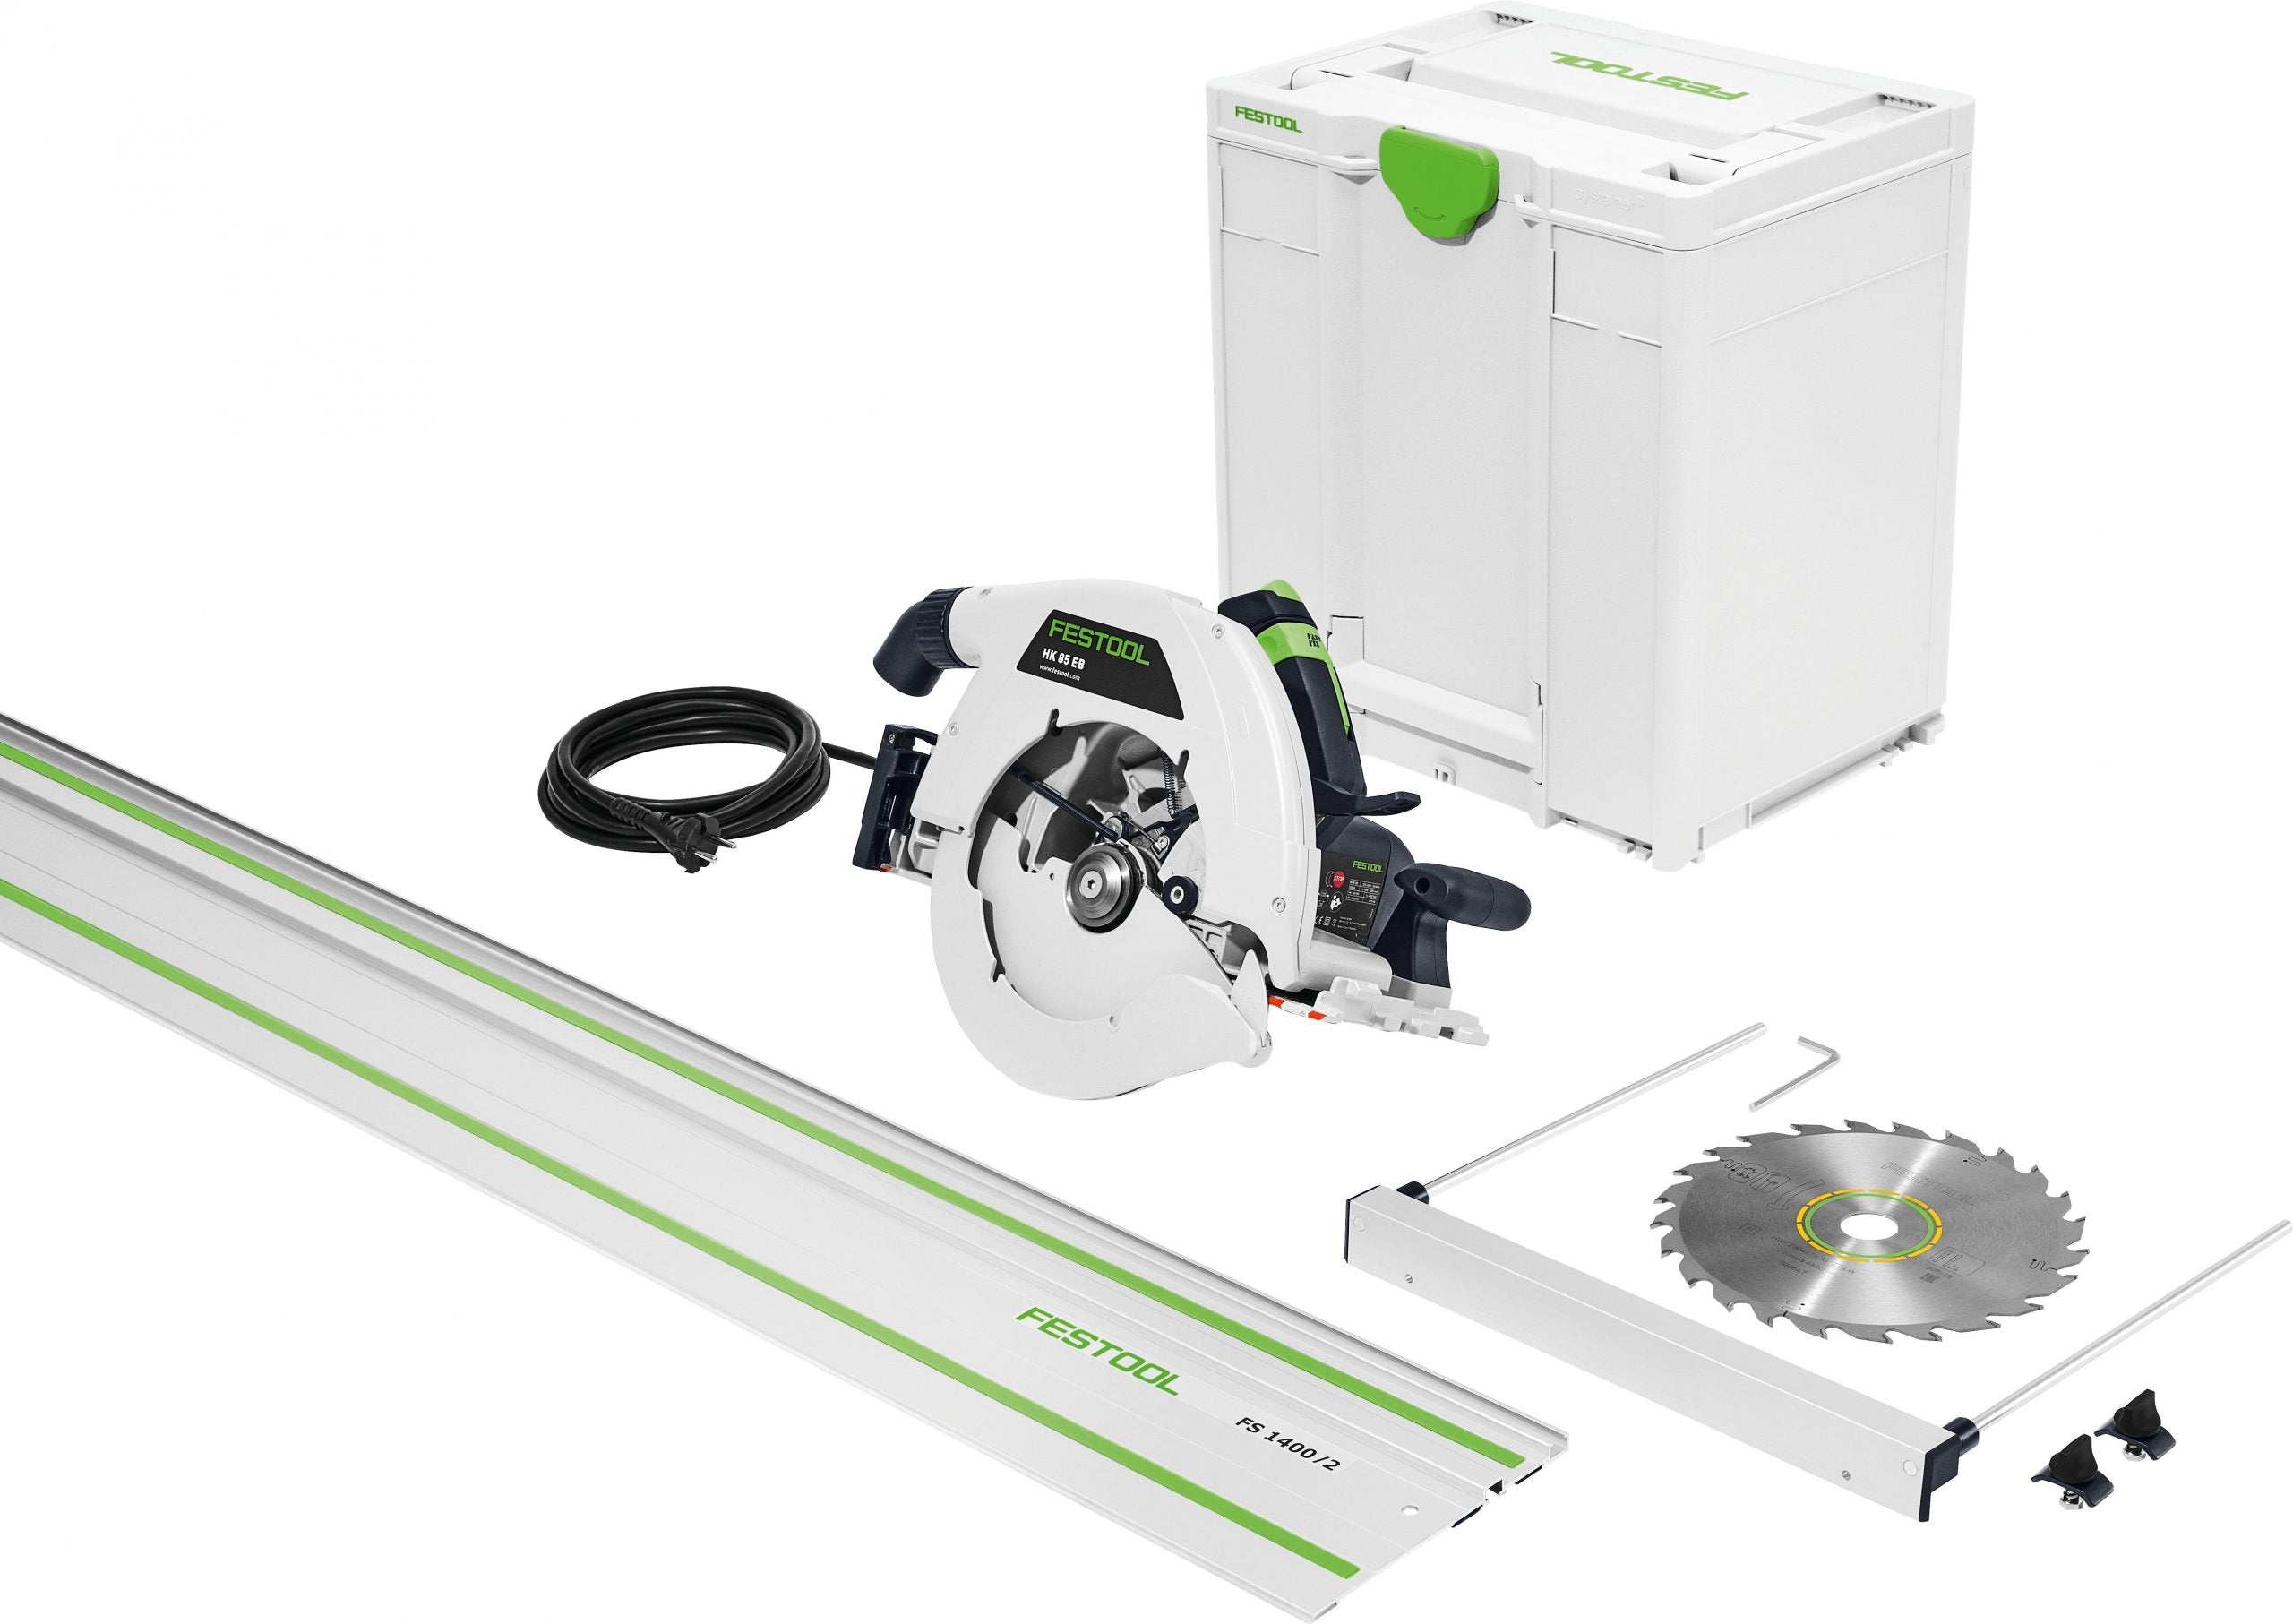 HK 85 230mm Circular Saw in Systainer with 1400mm Rail 576139 by Festool